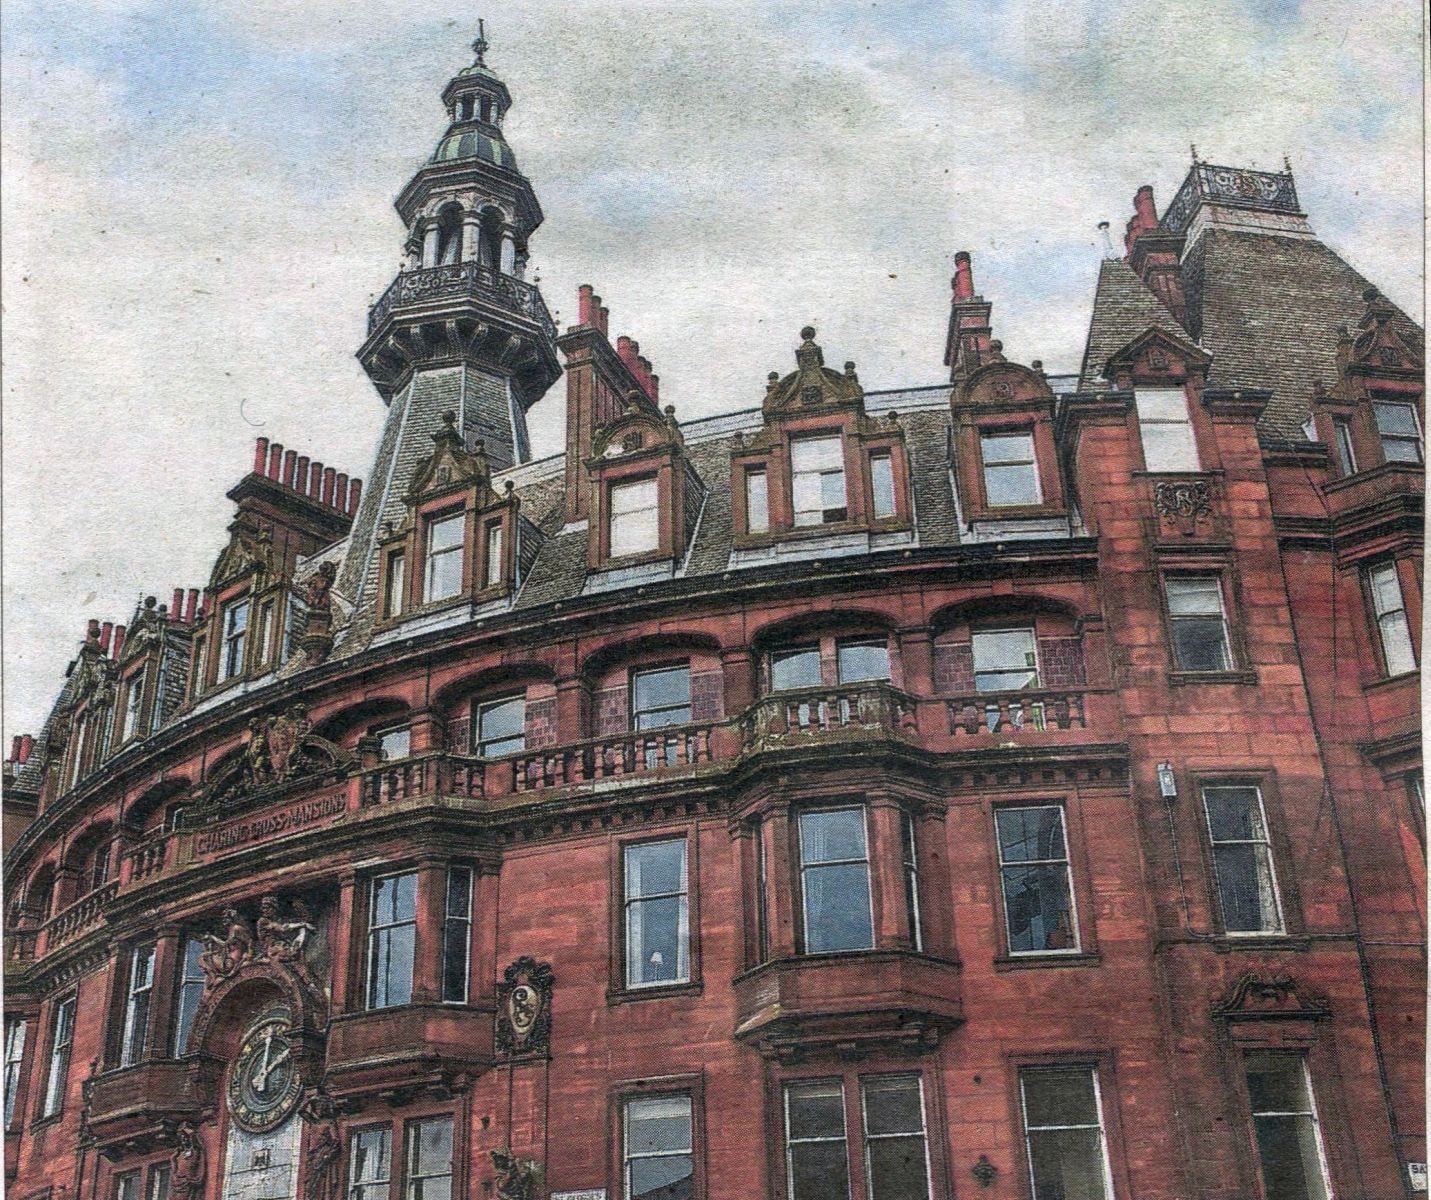 Charing Cross Mansions in Glasgow, Scotland